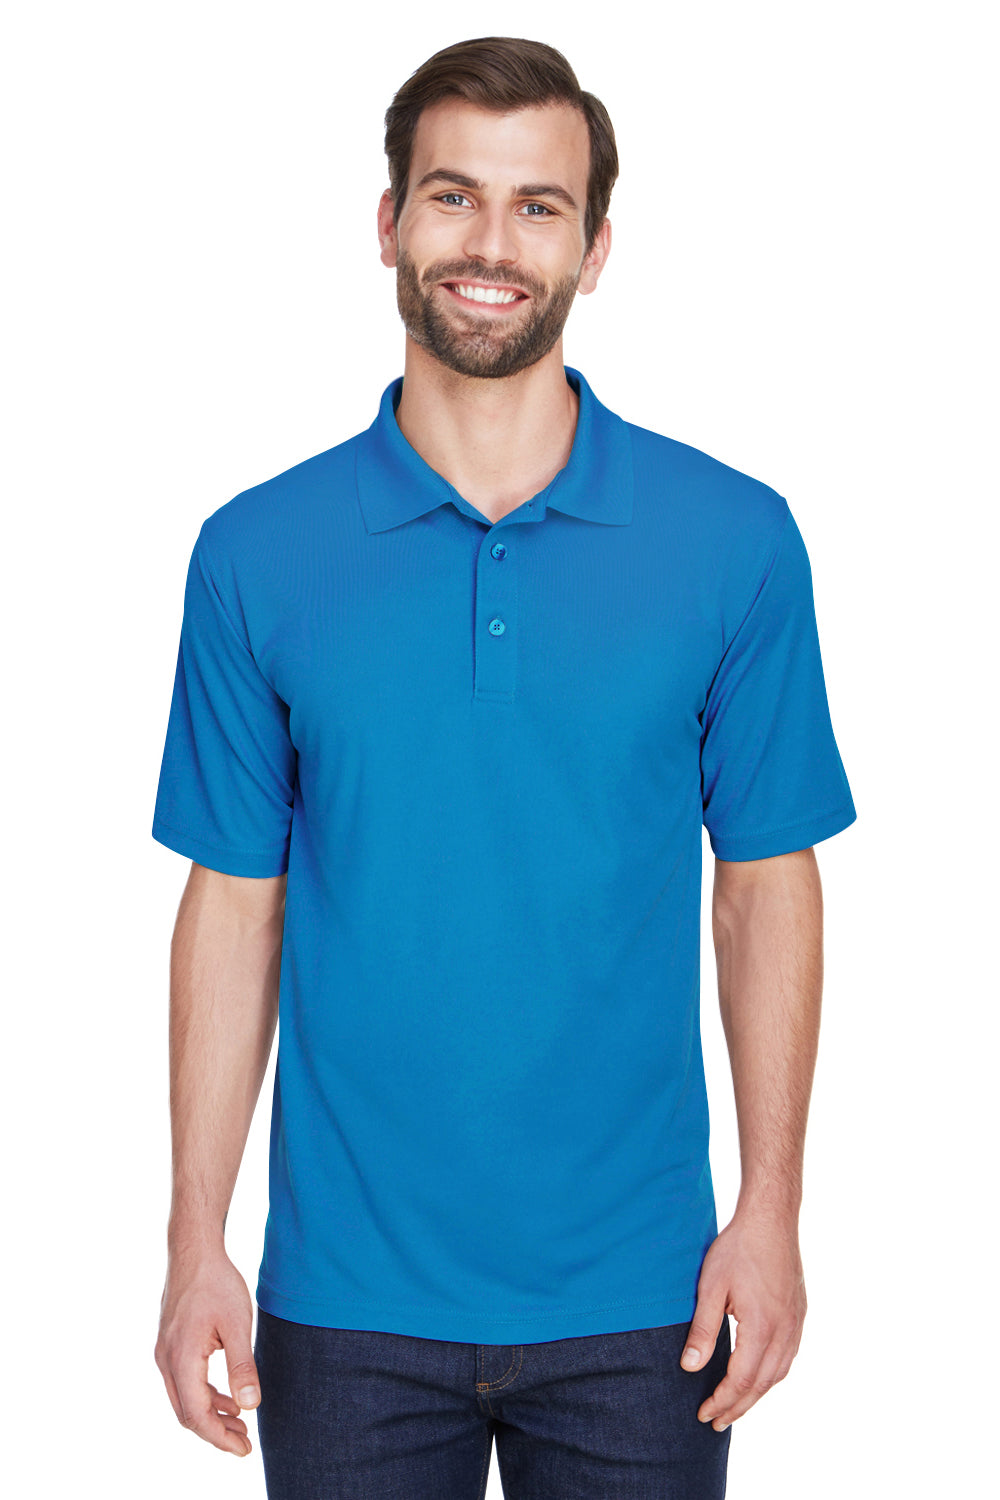 UltraClub 8210 Mens Cool & Dry Moisture Wicking Short Sleeve Polo Shirt Pacific Blue Front